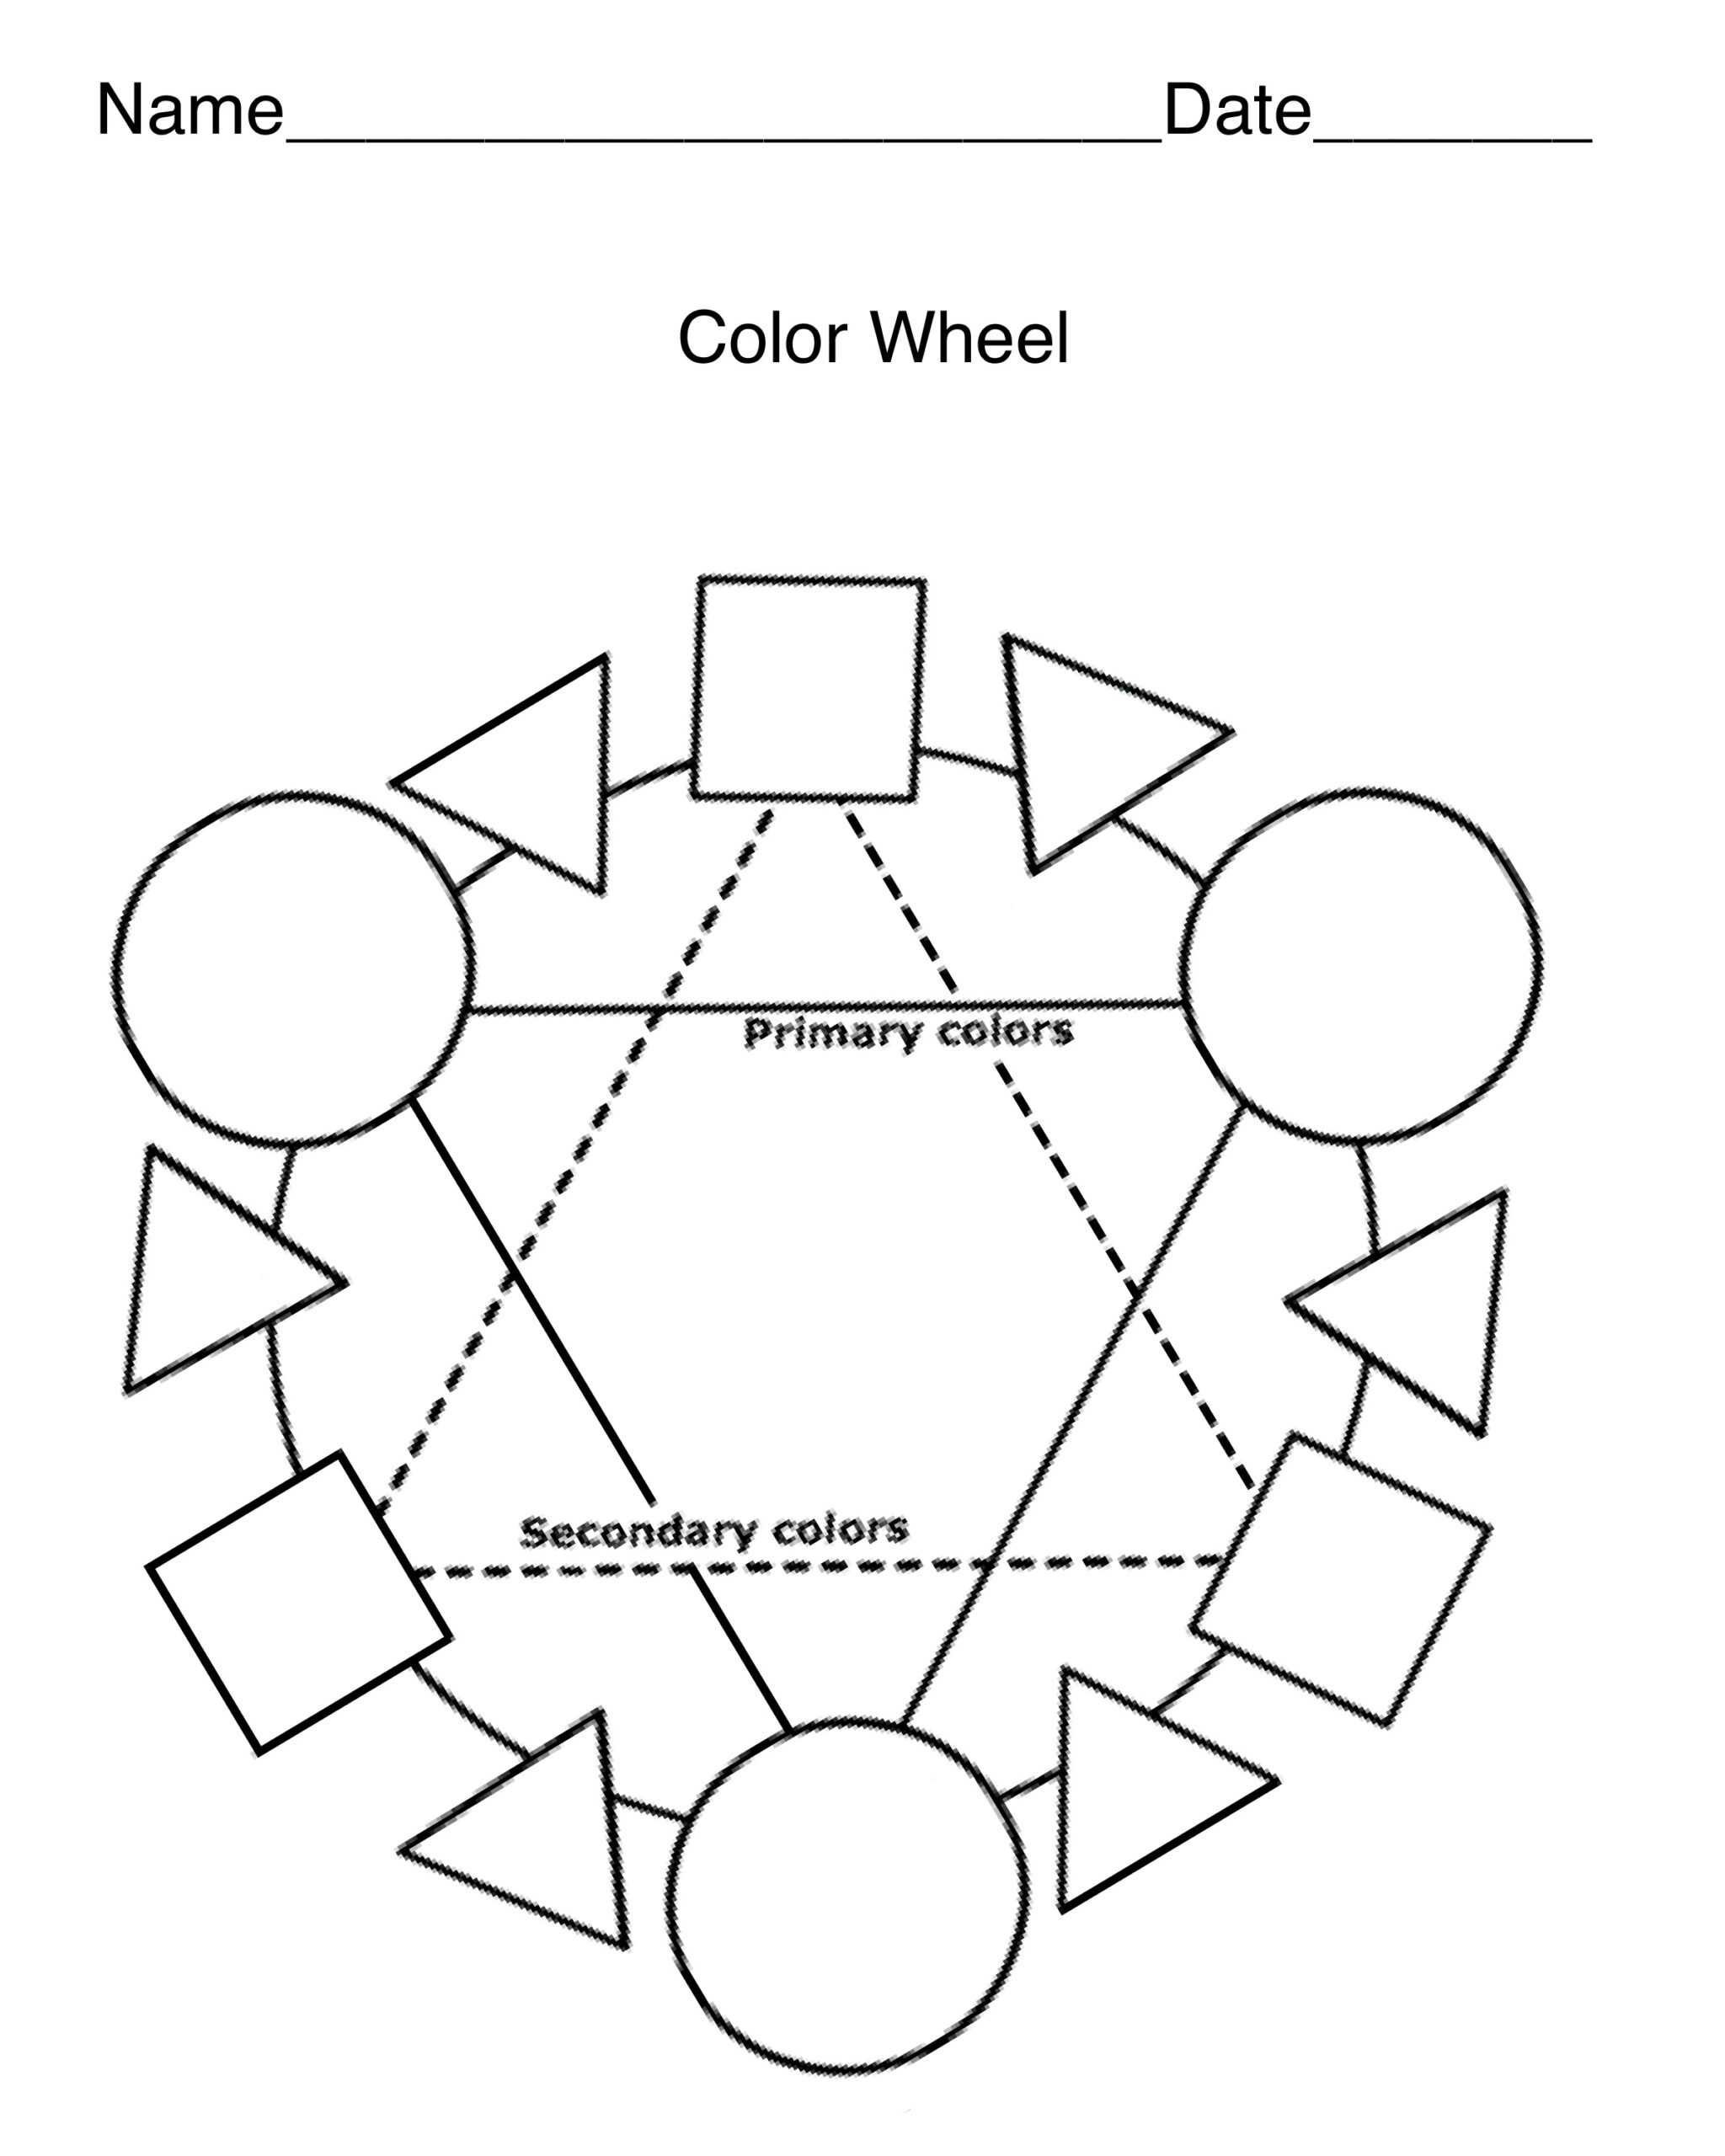 Blank Color Wheel Template. Tertiary Colors Blank Color Inside Blank Color Wheel Template